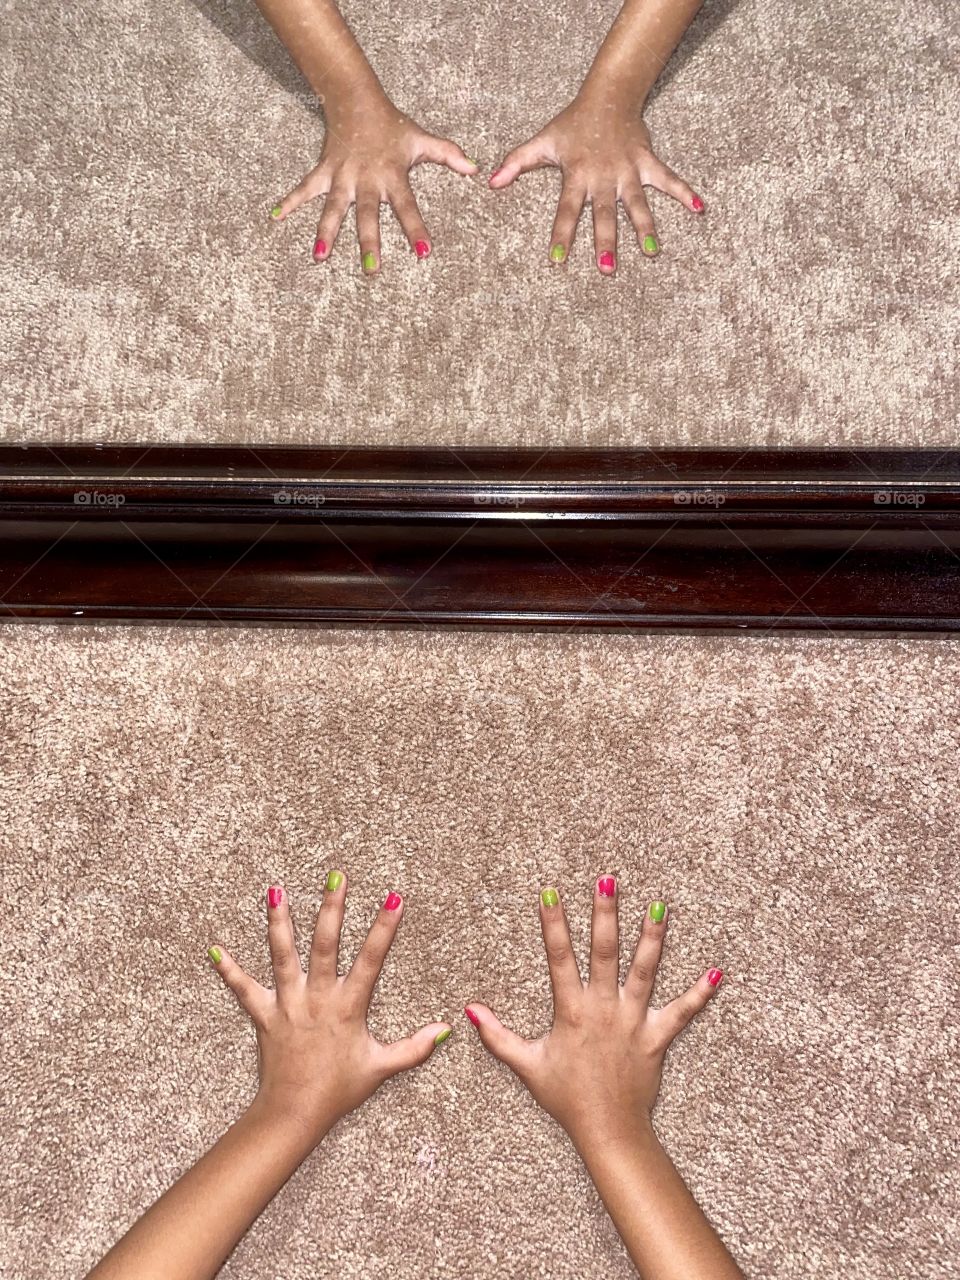 Reflection of little manicured hands with watermelon colors 